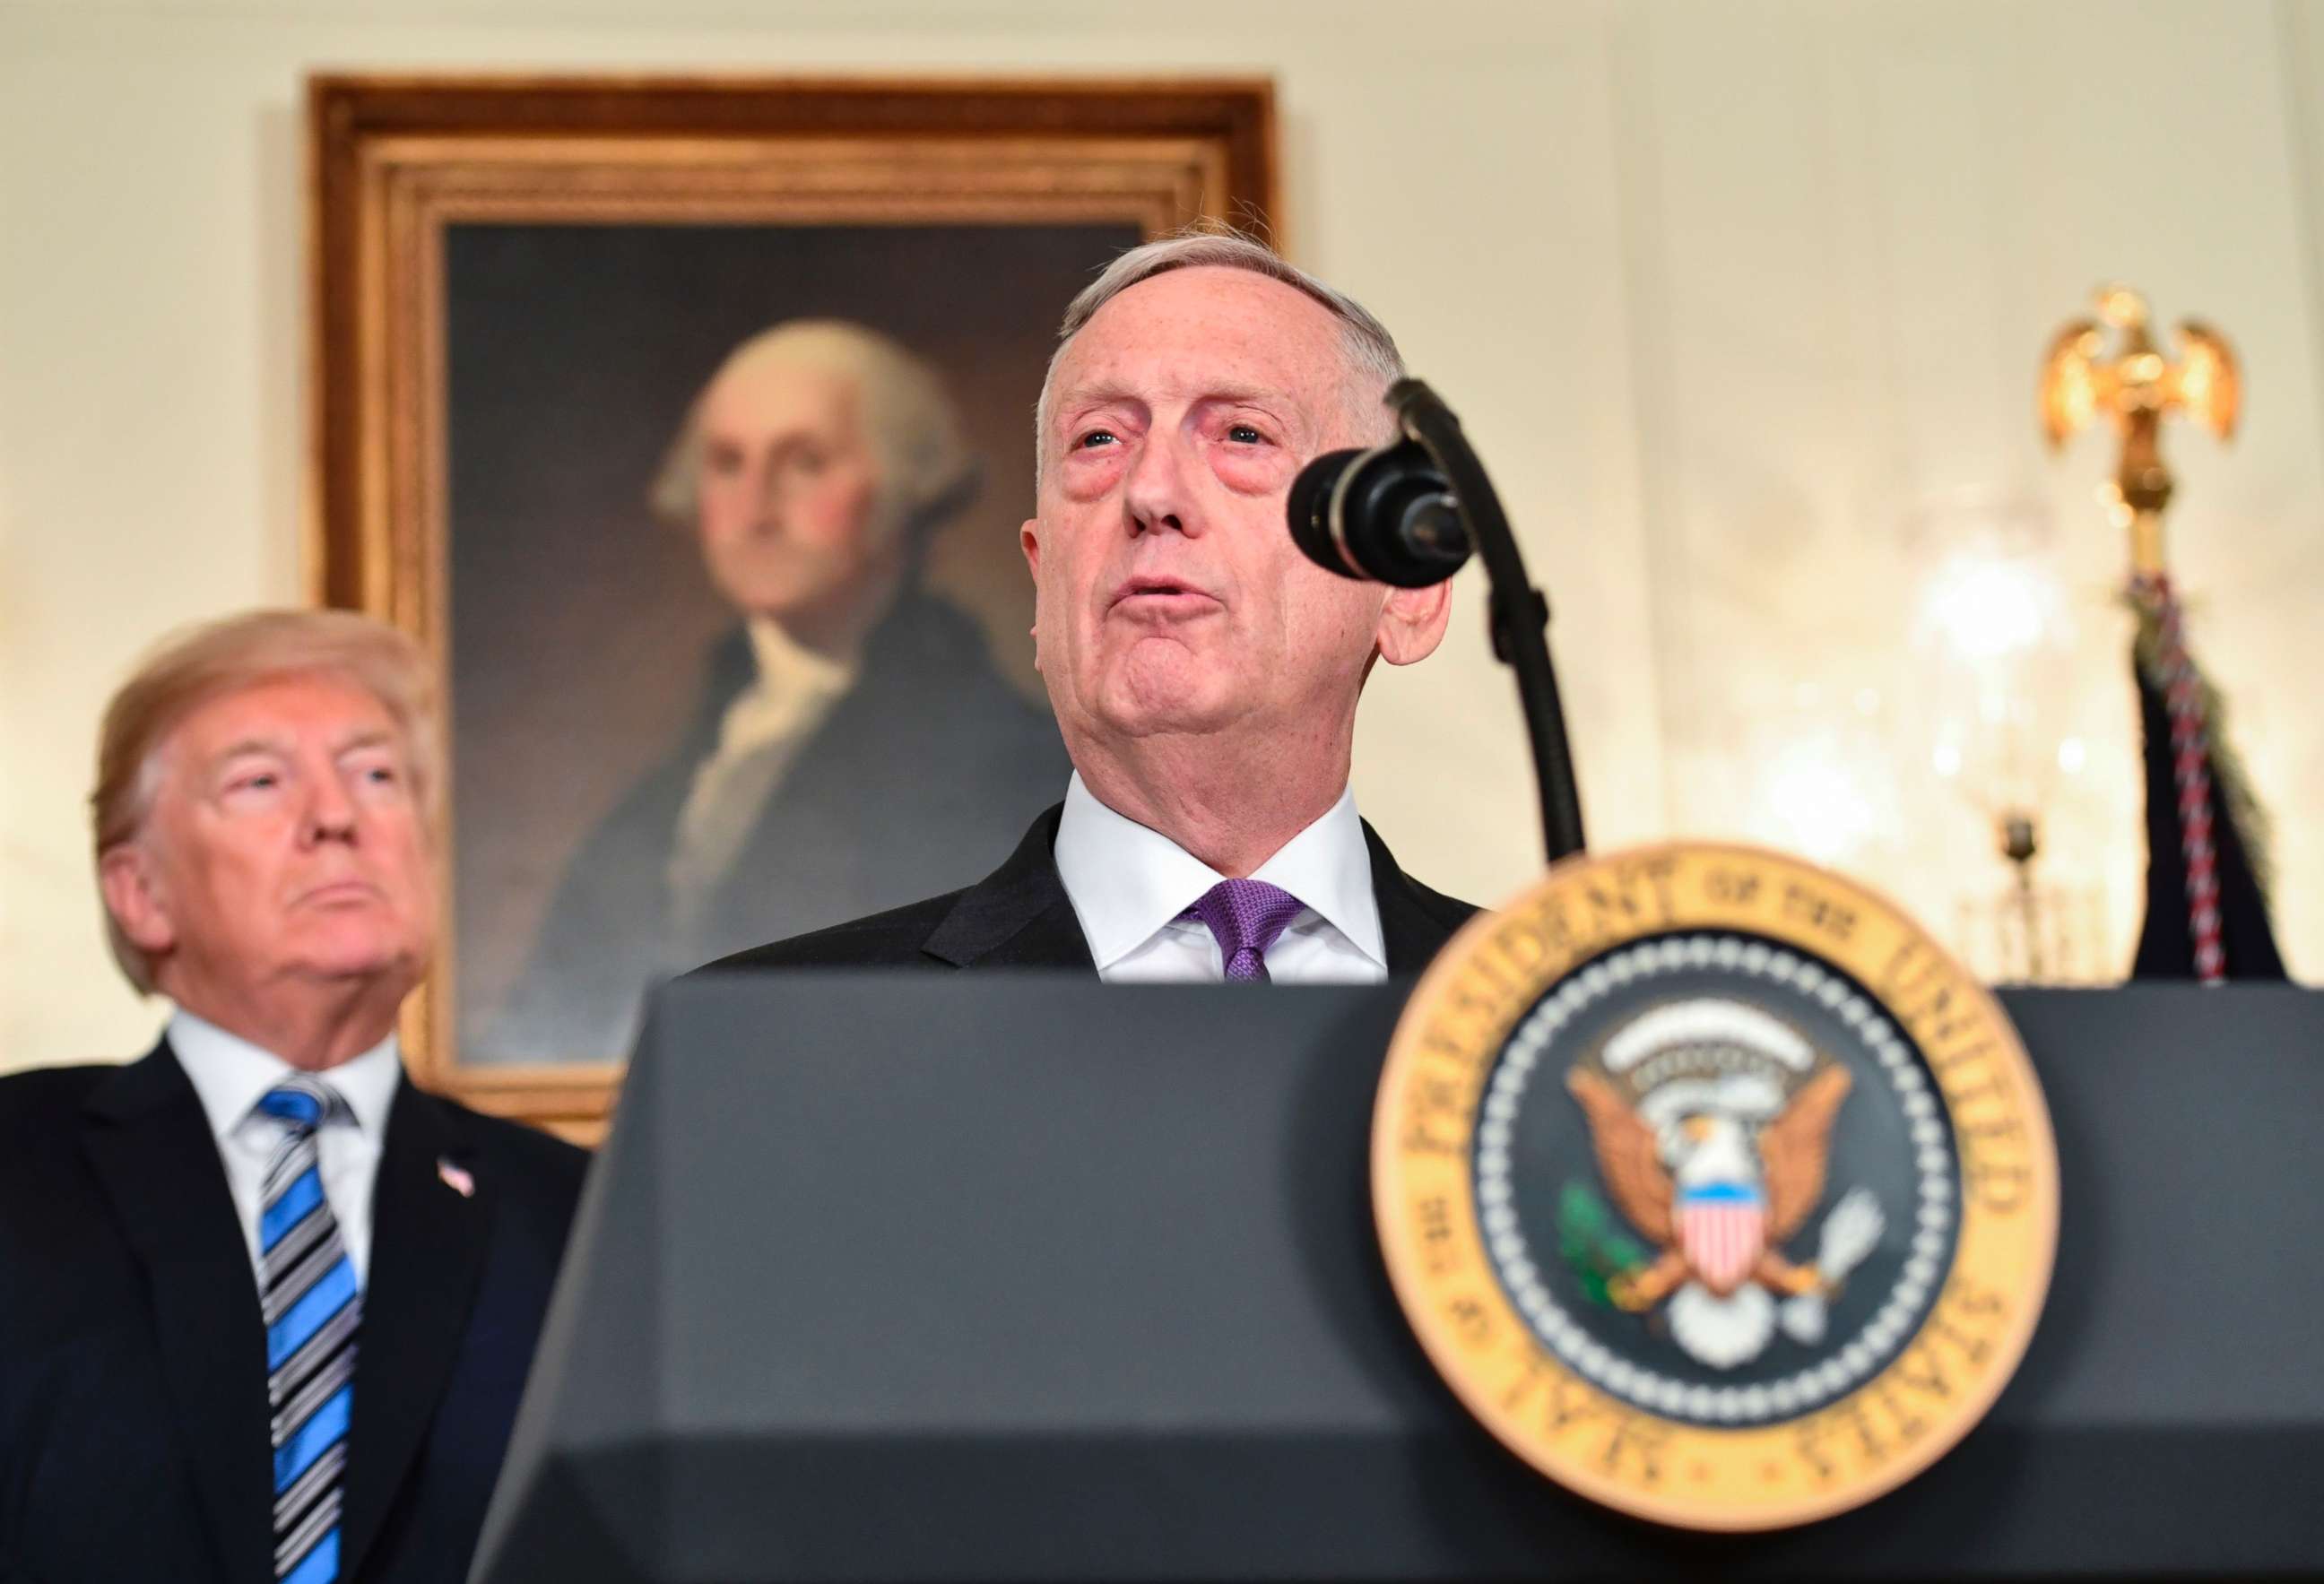 PHOTO: President Donald Trump looks on as Secretary of Defense James Mattis speaks about the spending bill during a press conference in the Diplomatic Reception Room at the White House on March 23, 2018.